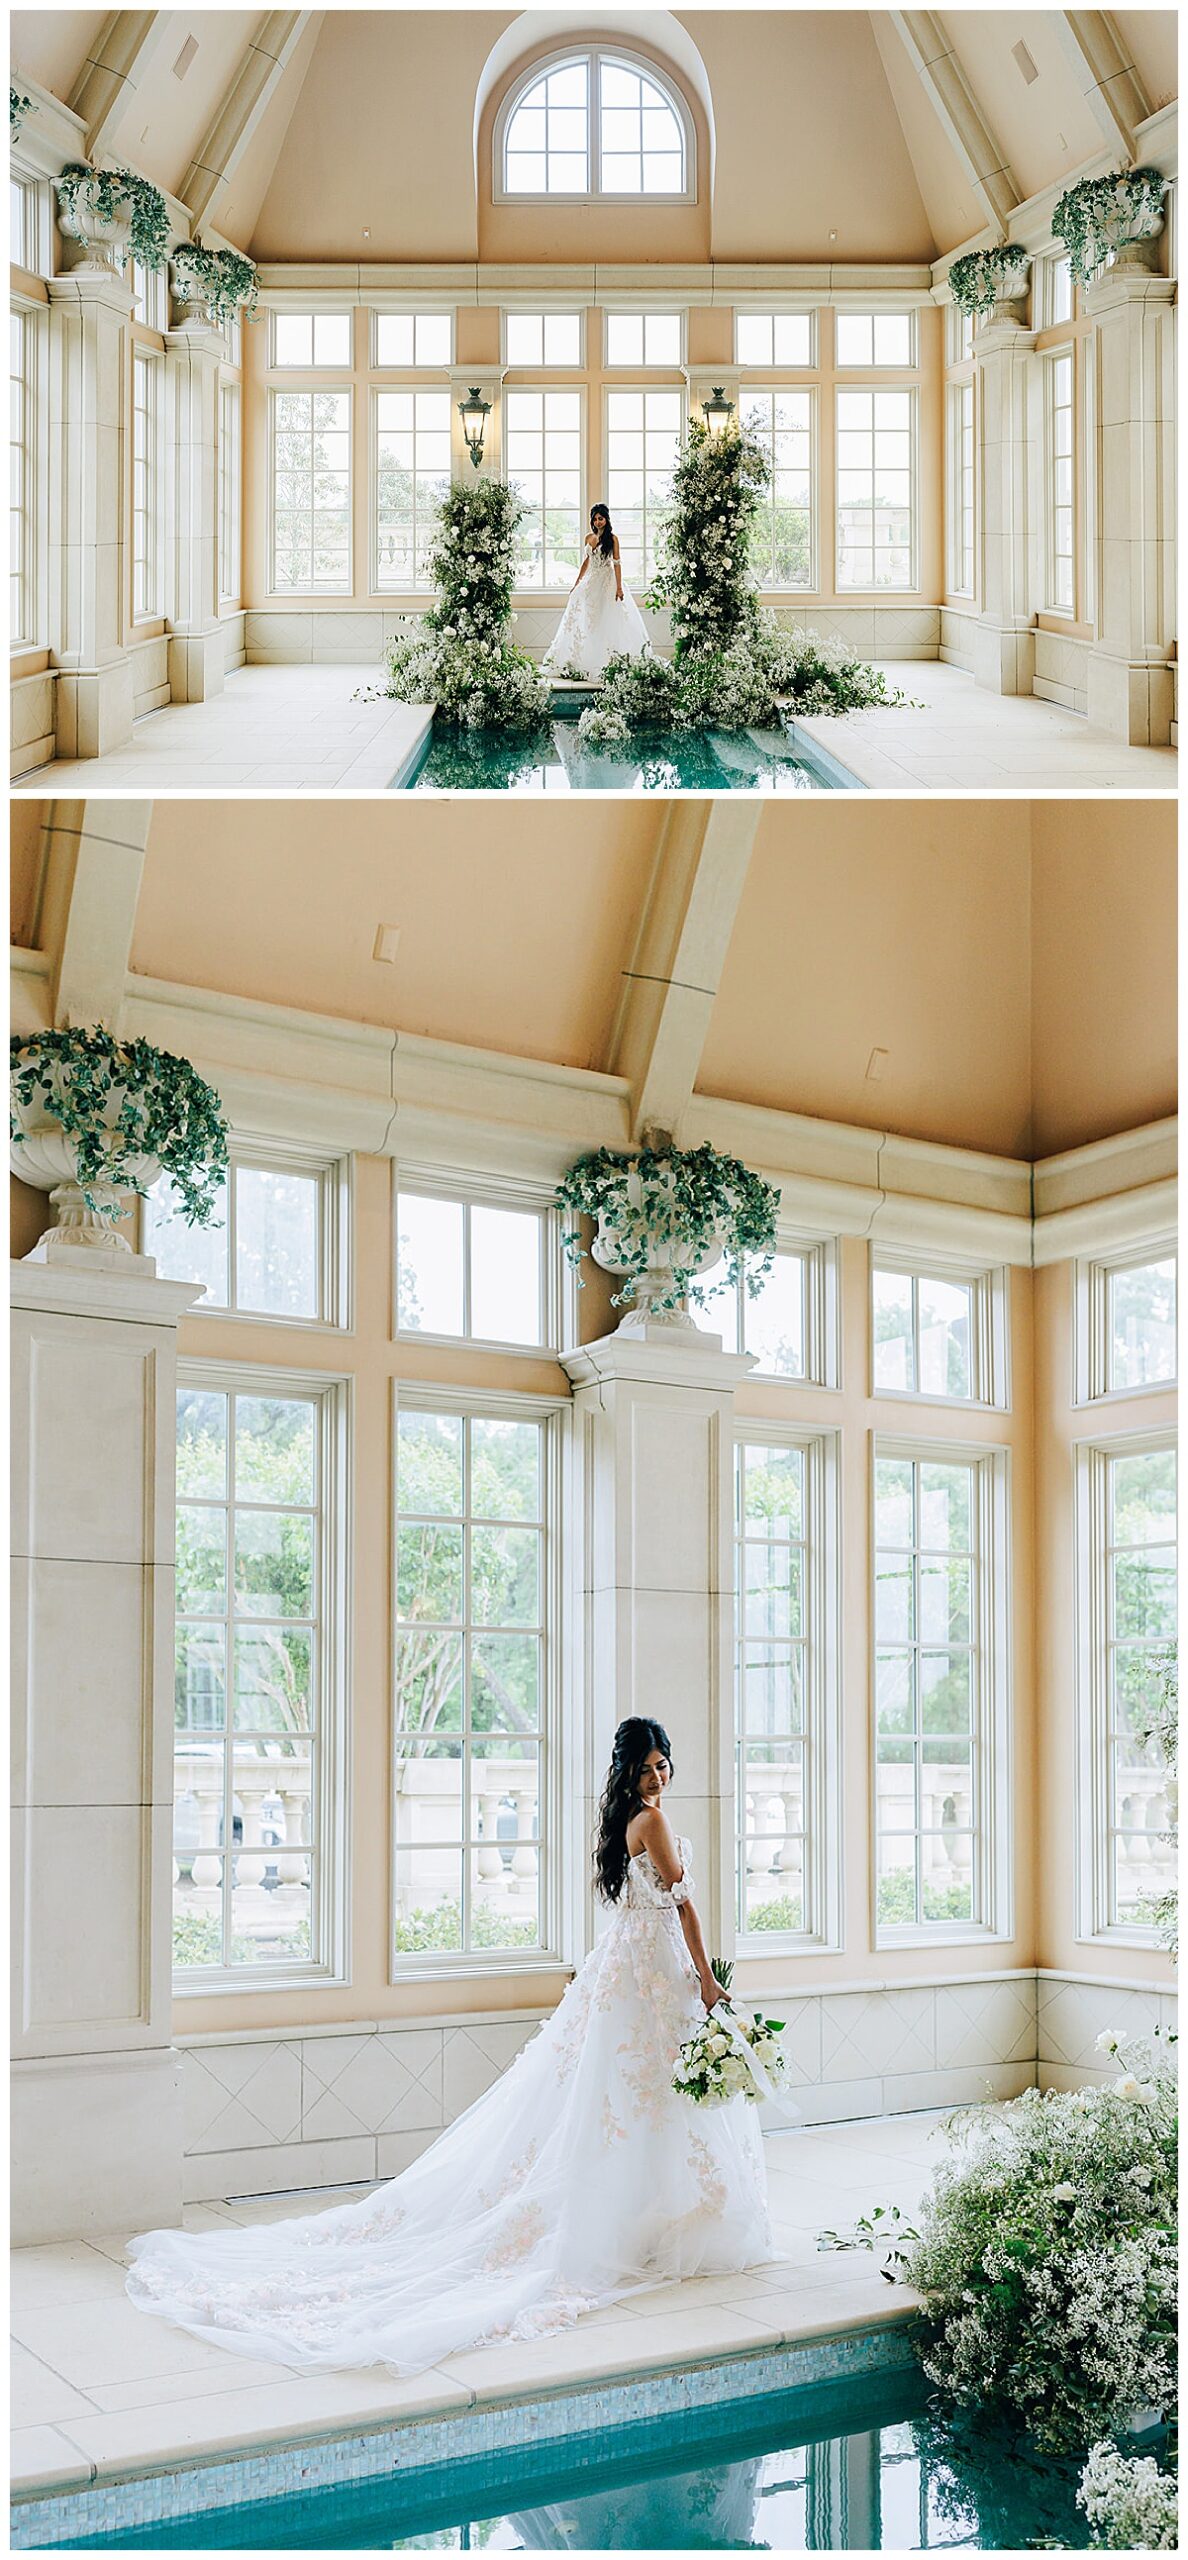 Making The Switch To Full-Day Wedding Packages to capture moments like this bride walking by arch decor and venue swimming pool